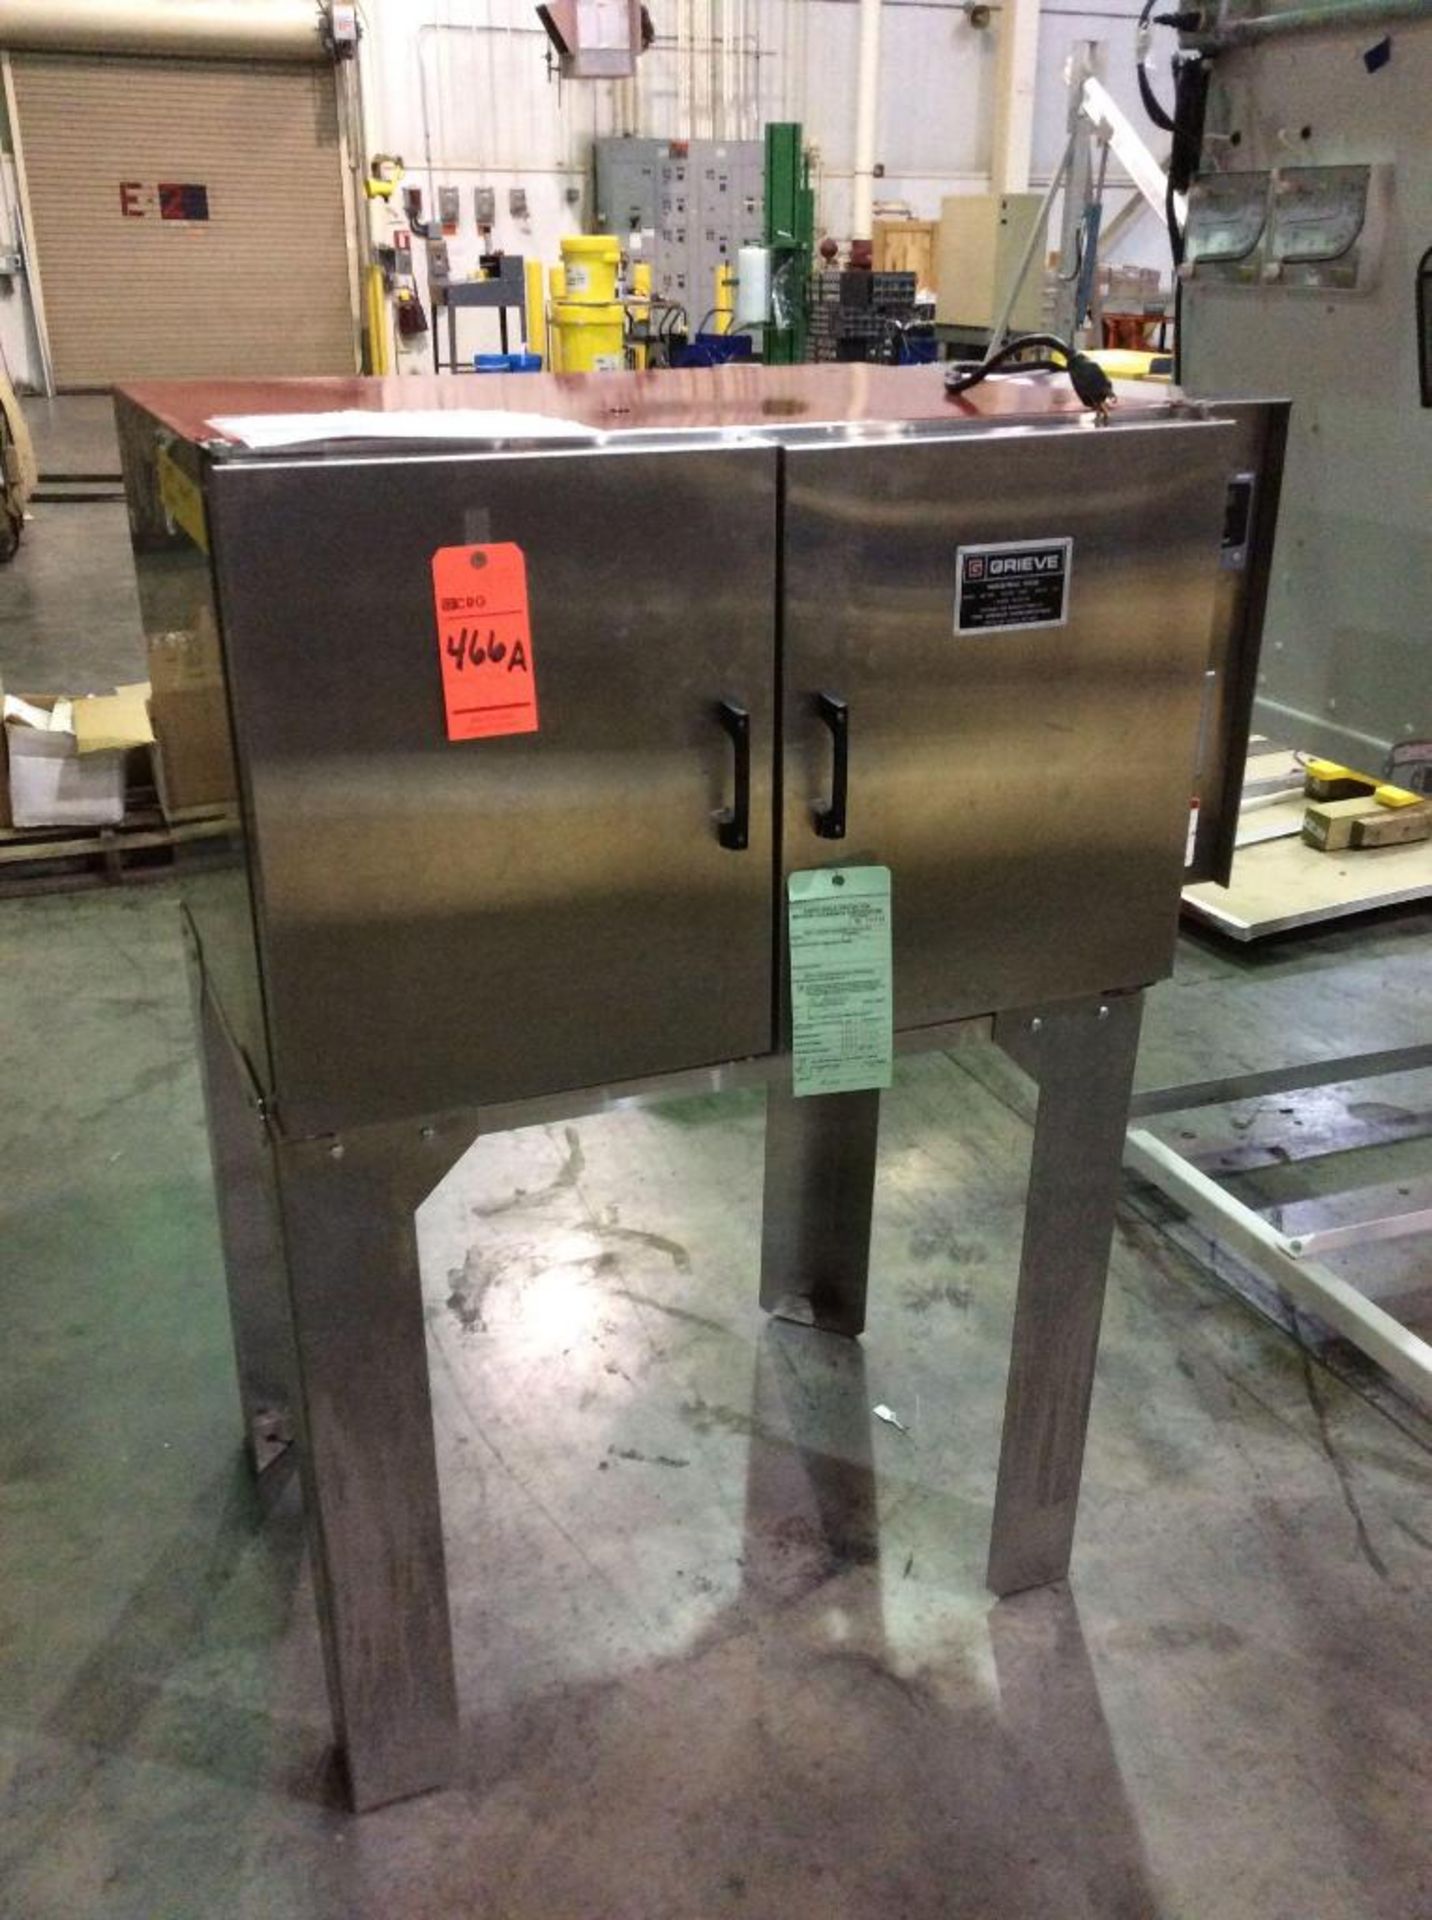 Grieve stainless steel industrial oven, mn NB-350, 2000 watts, 115 volts, 1 phase 28" x 18" x 24"